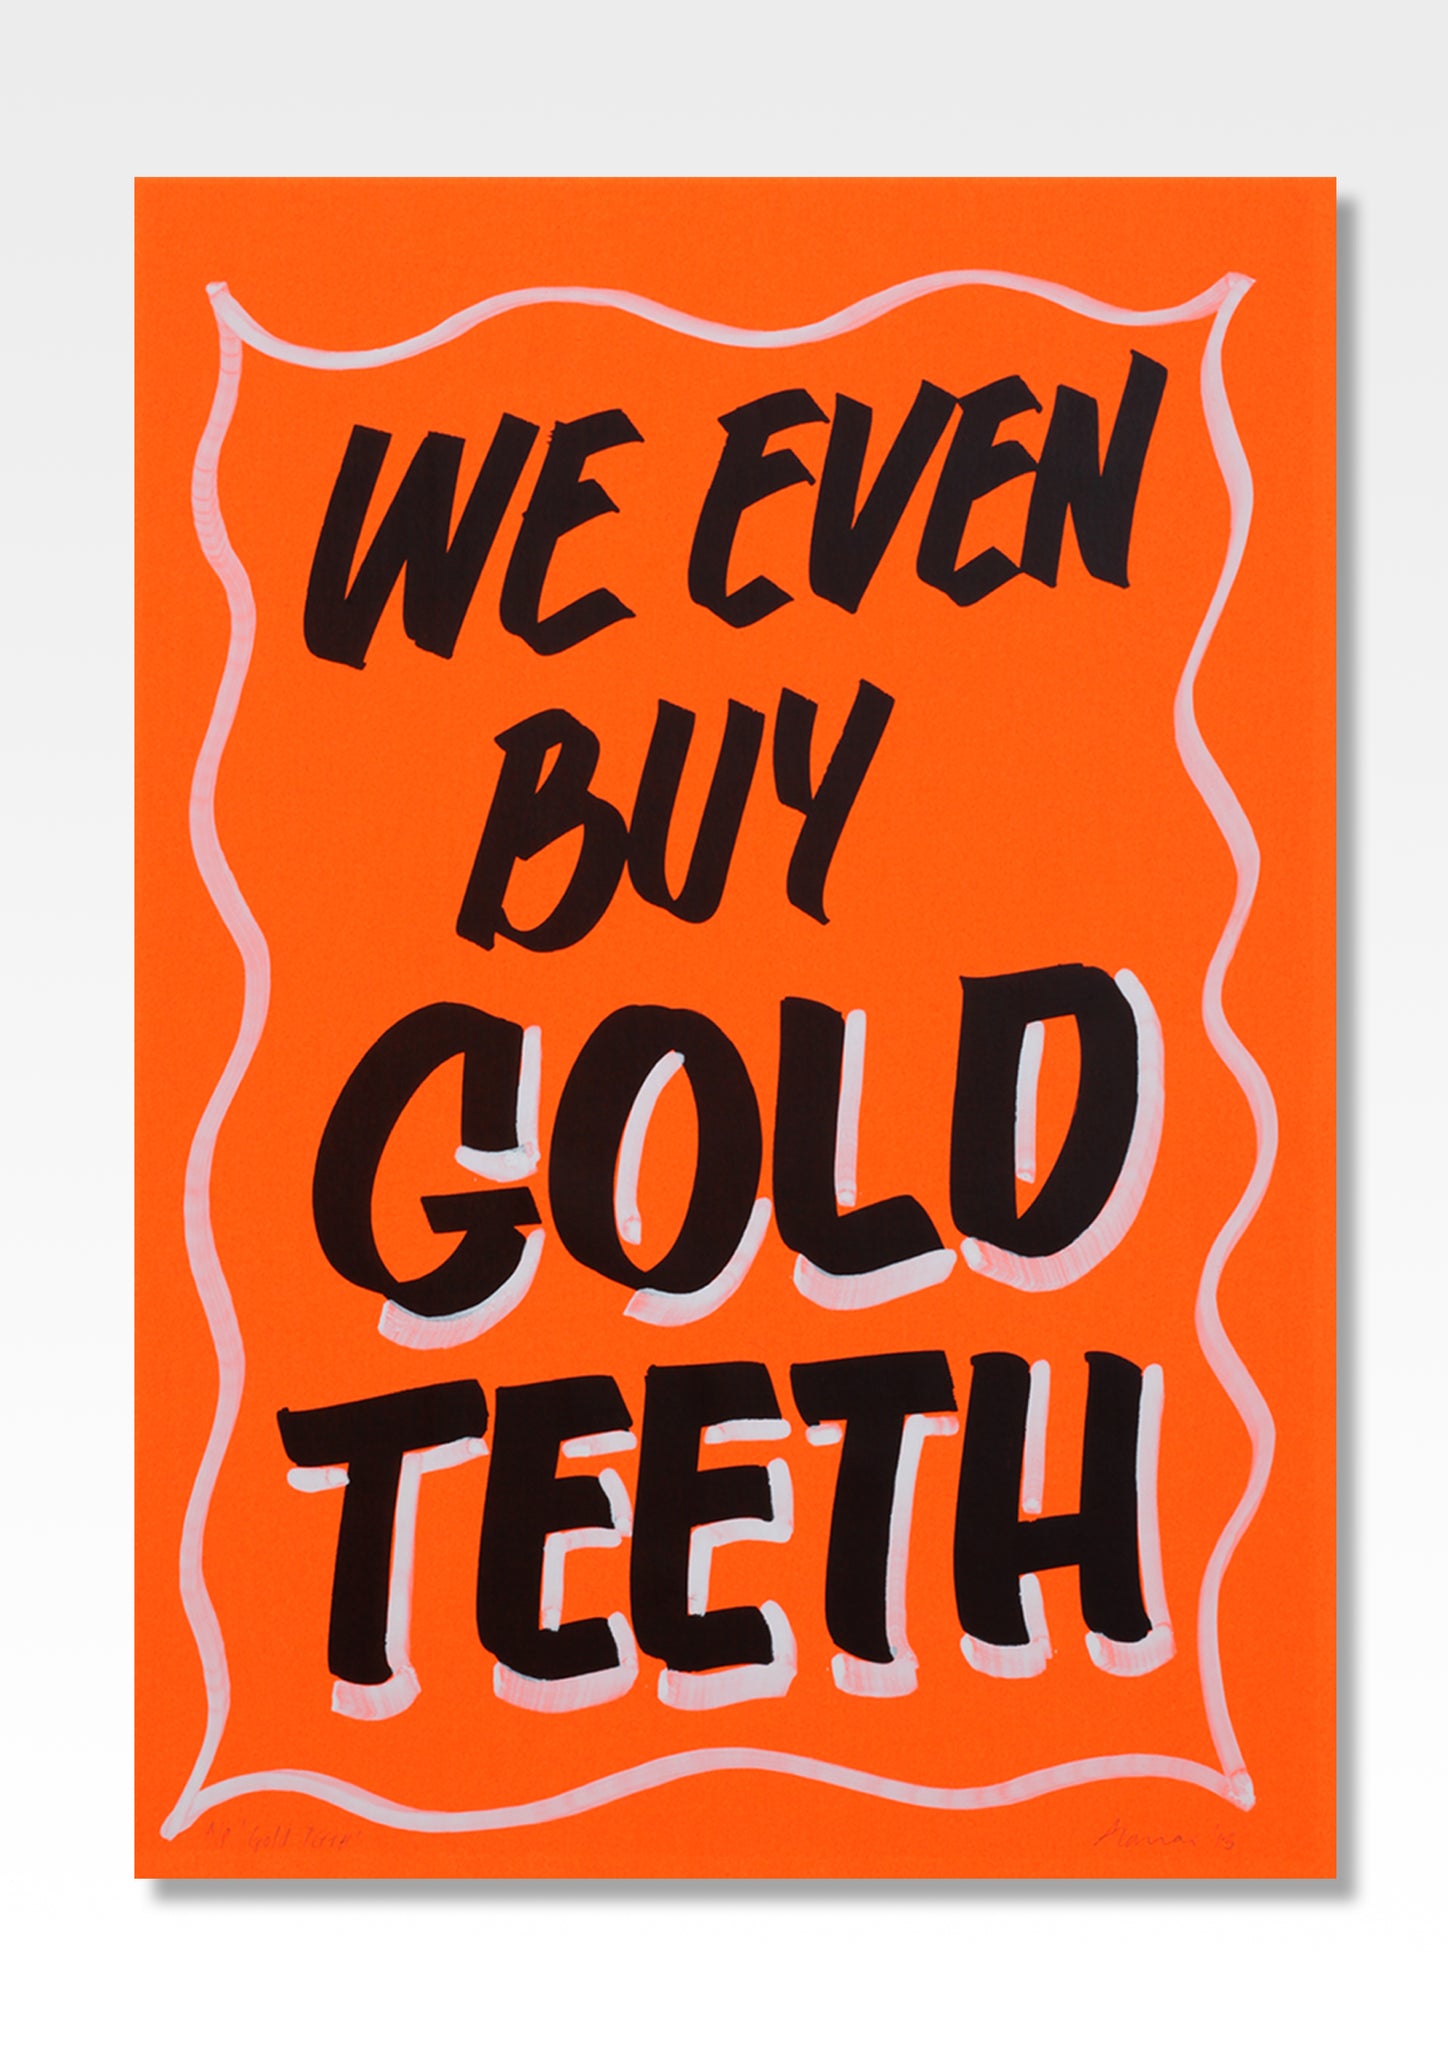 Gold Teeth - Hand-Finished Print